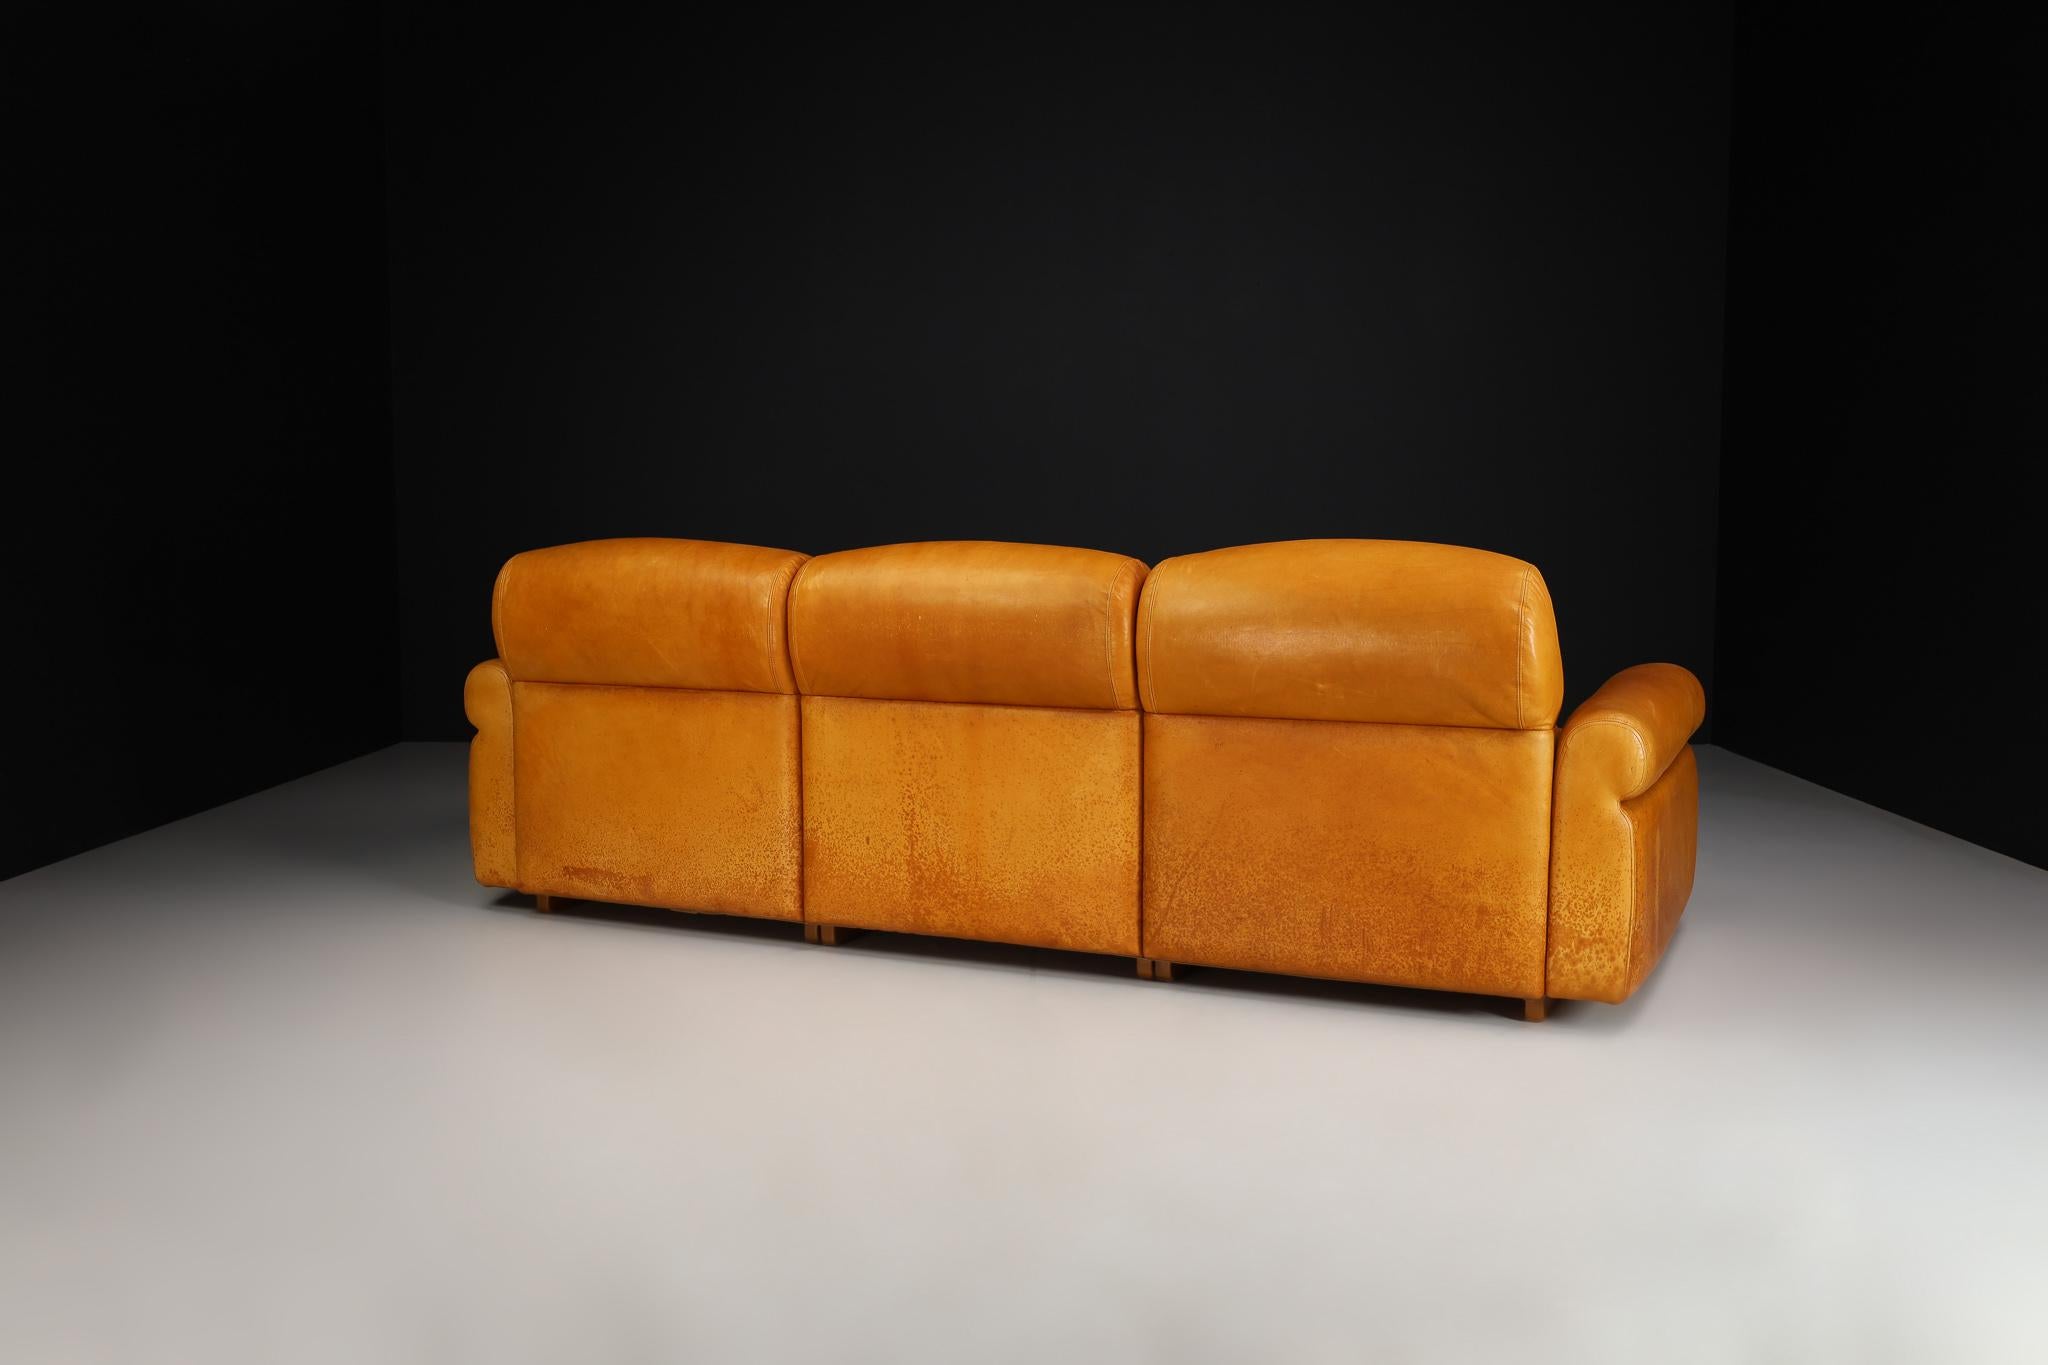 Large Mid-Century Modern Lounge Sofa in Cognac Leather, Italy 1960s For Sale 6